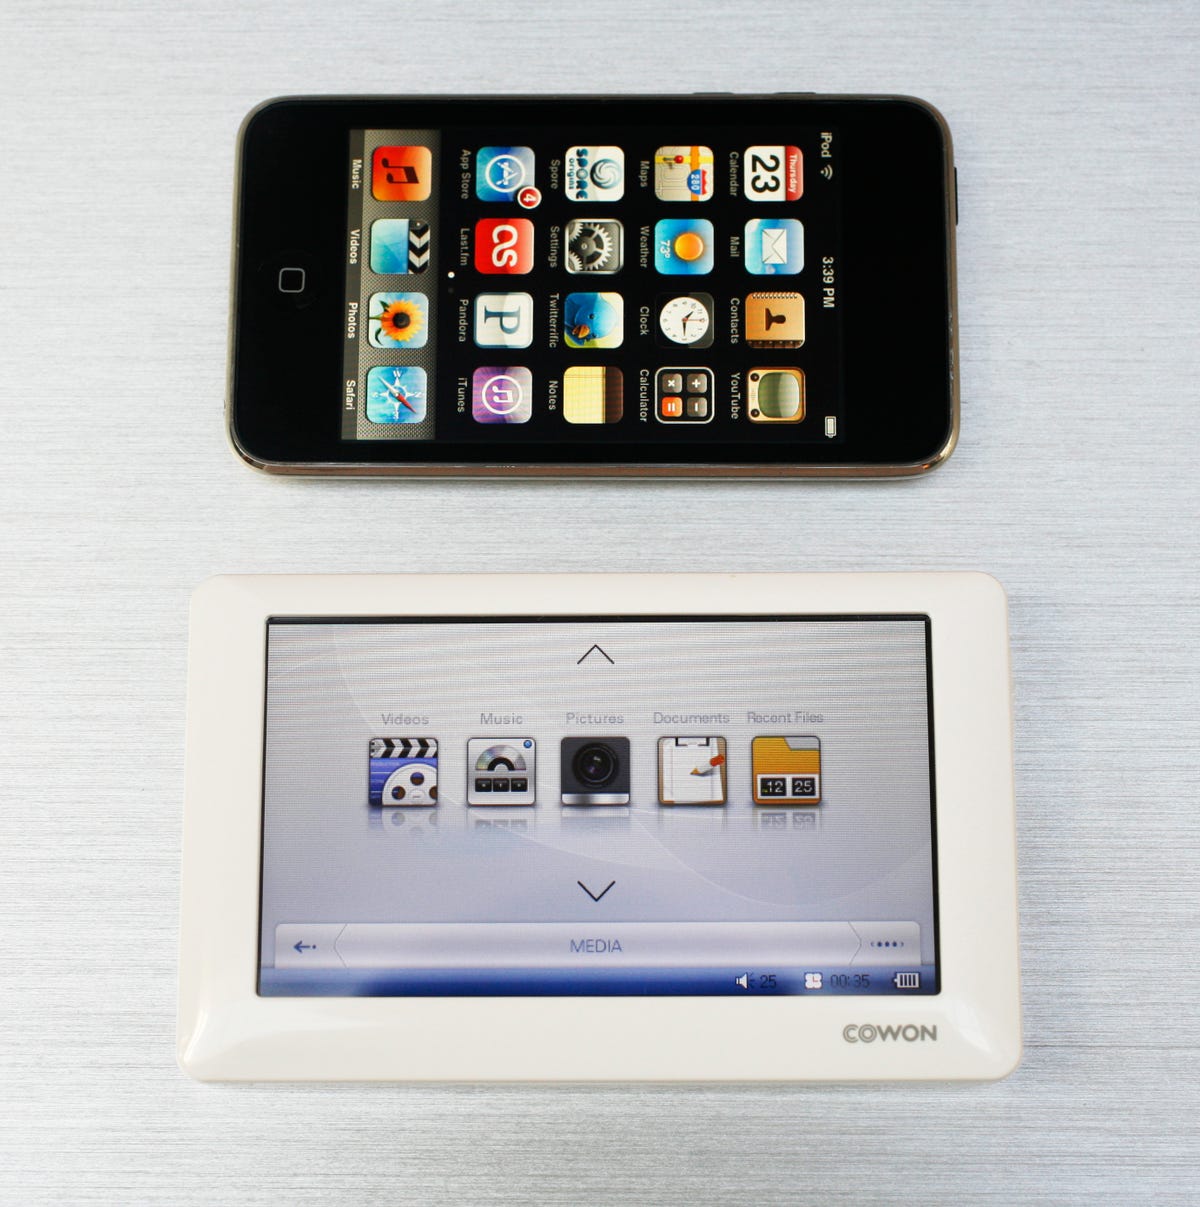 Photo of the Cowon O2 next to the Apple iPod Touch.